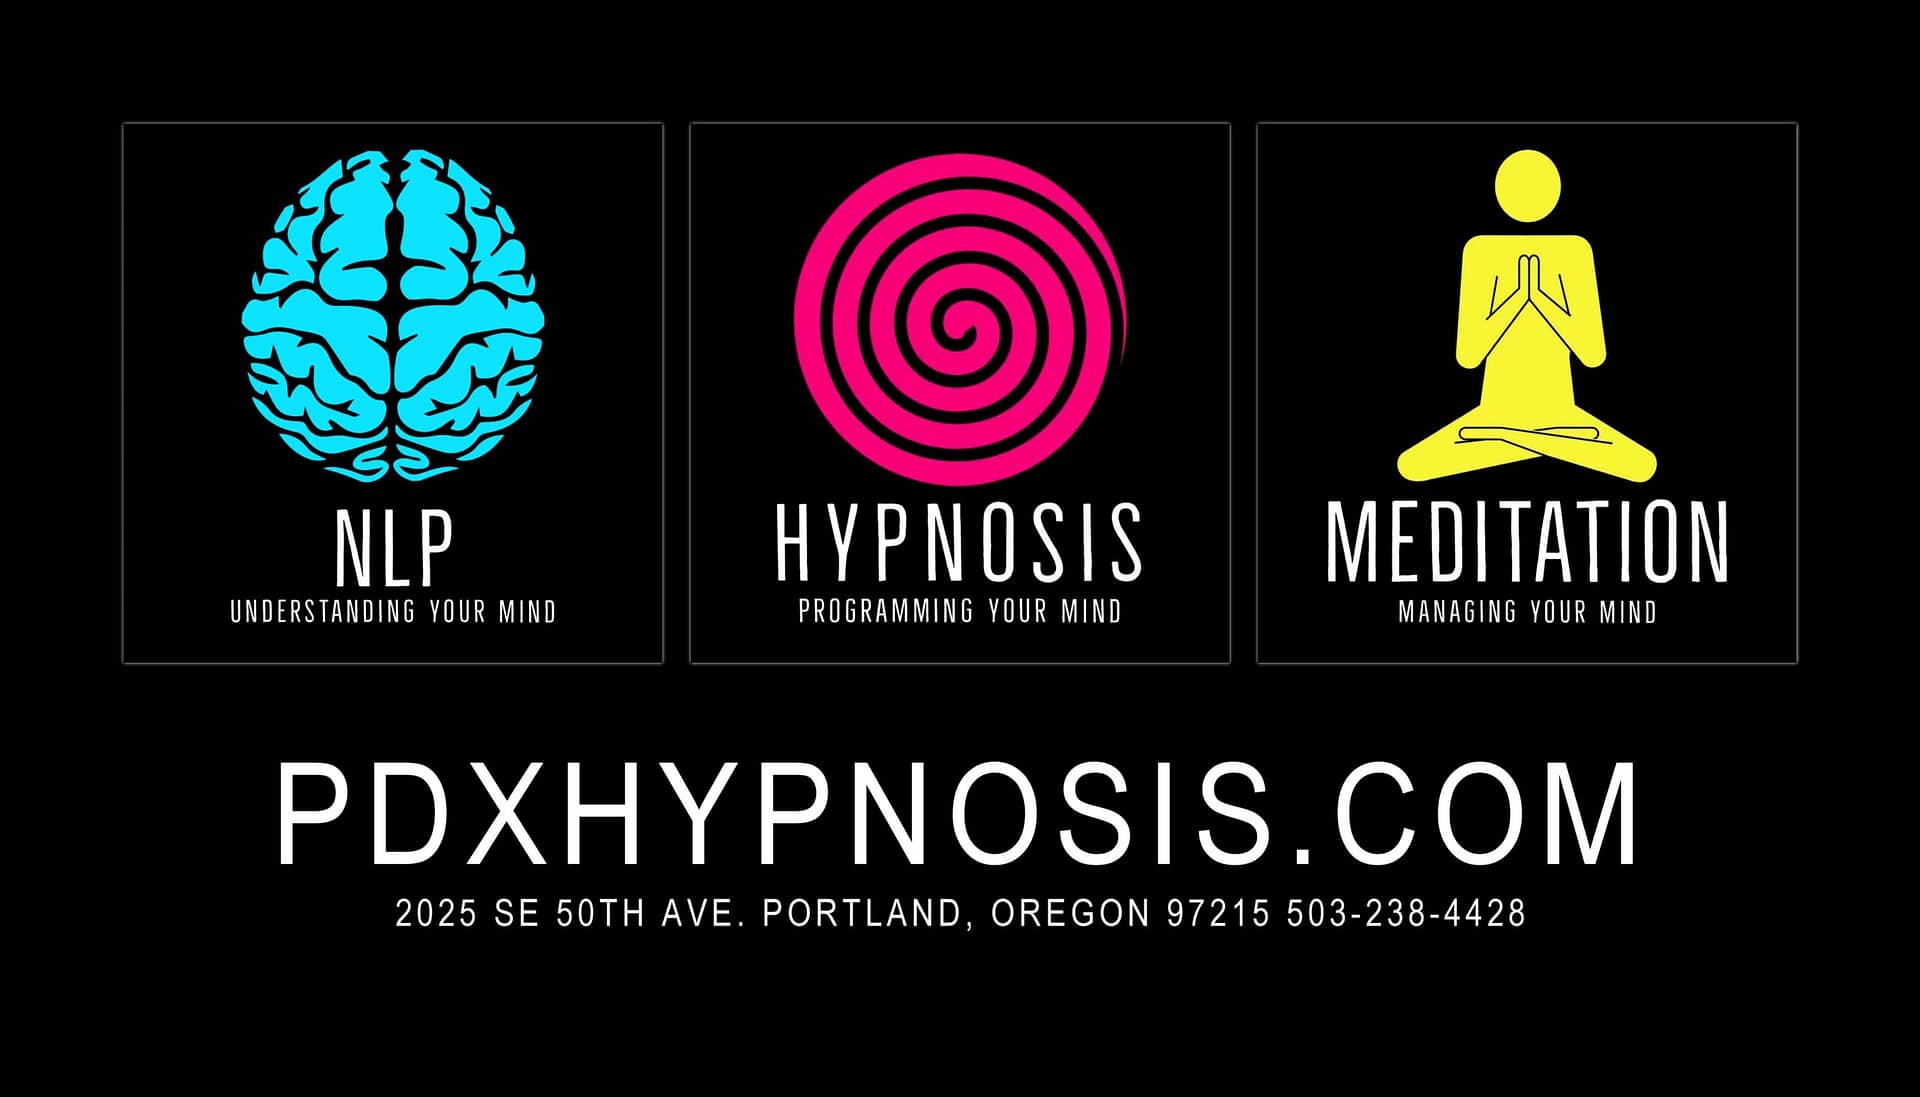 NLP, Hypnosis and Meditation with pdxhypnosis.com